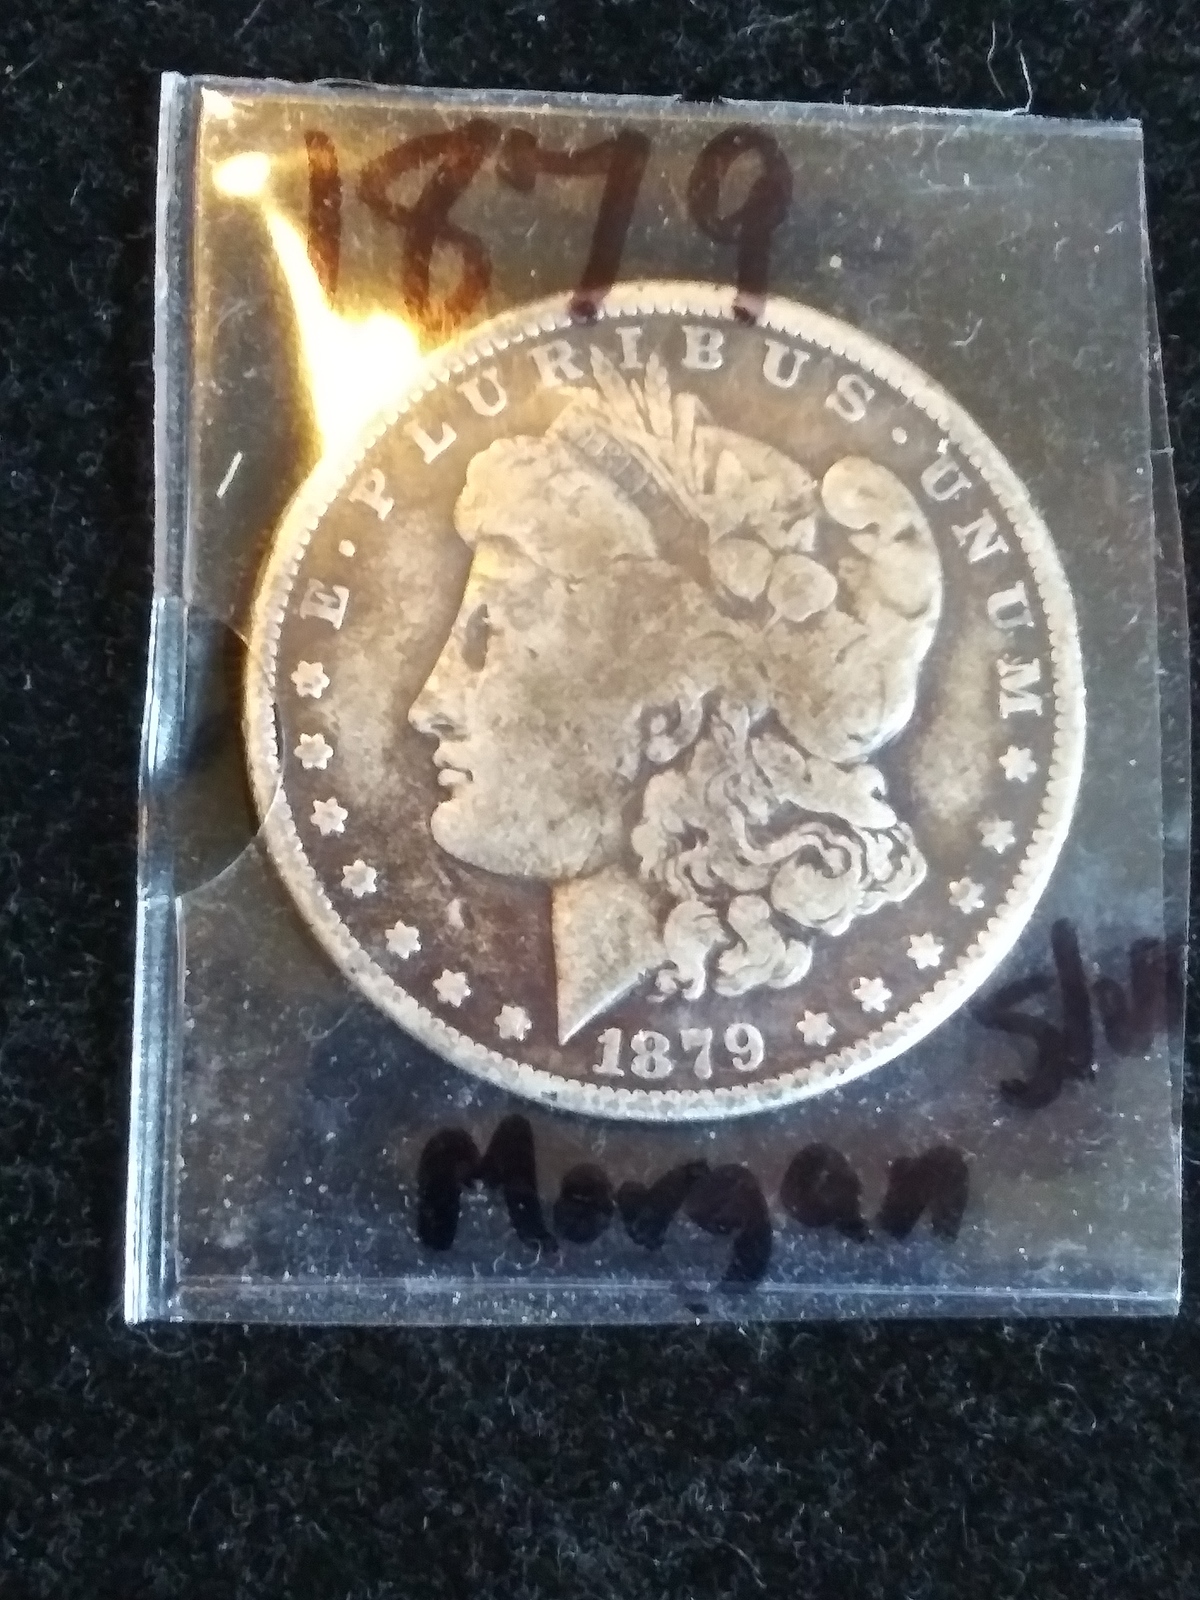 1879 Morgan Silver Dollar - Authentic early issue 140 yrs old - $39.99